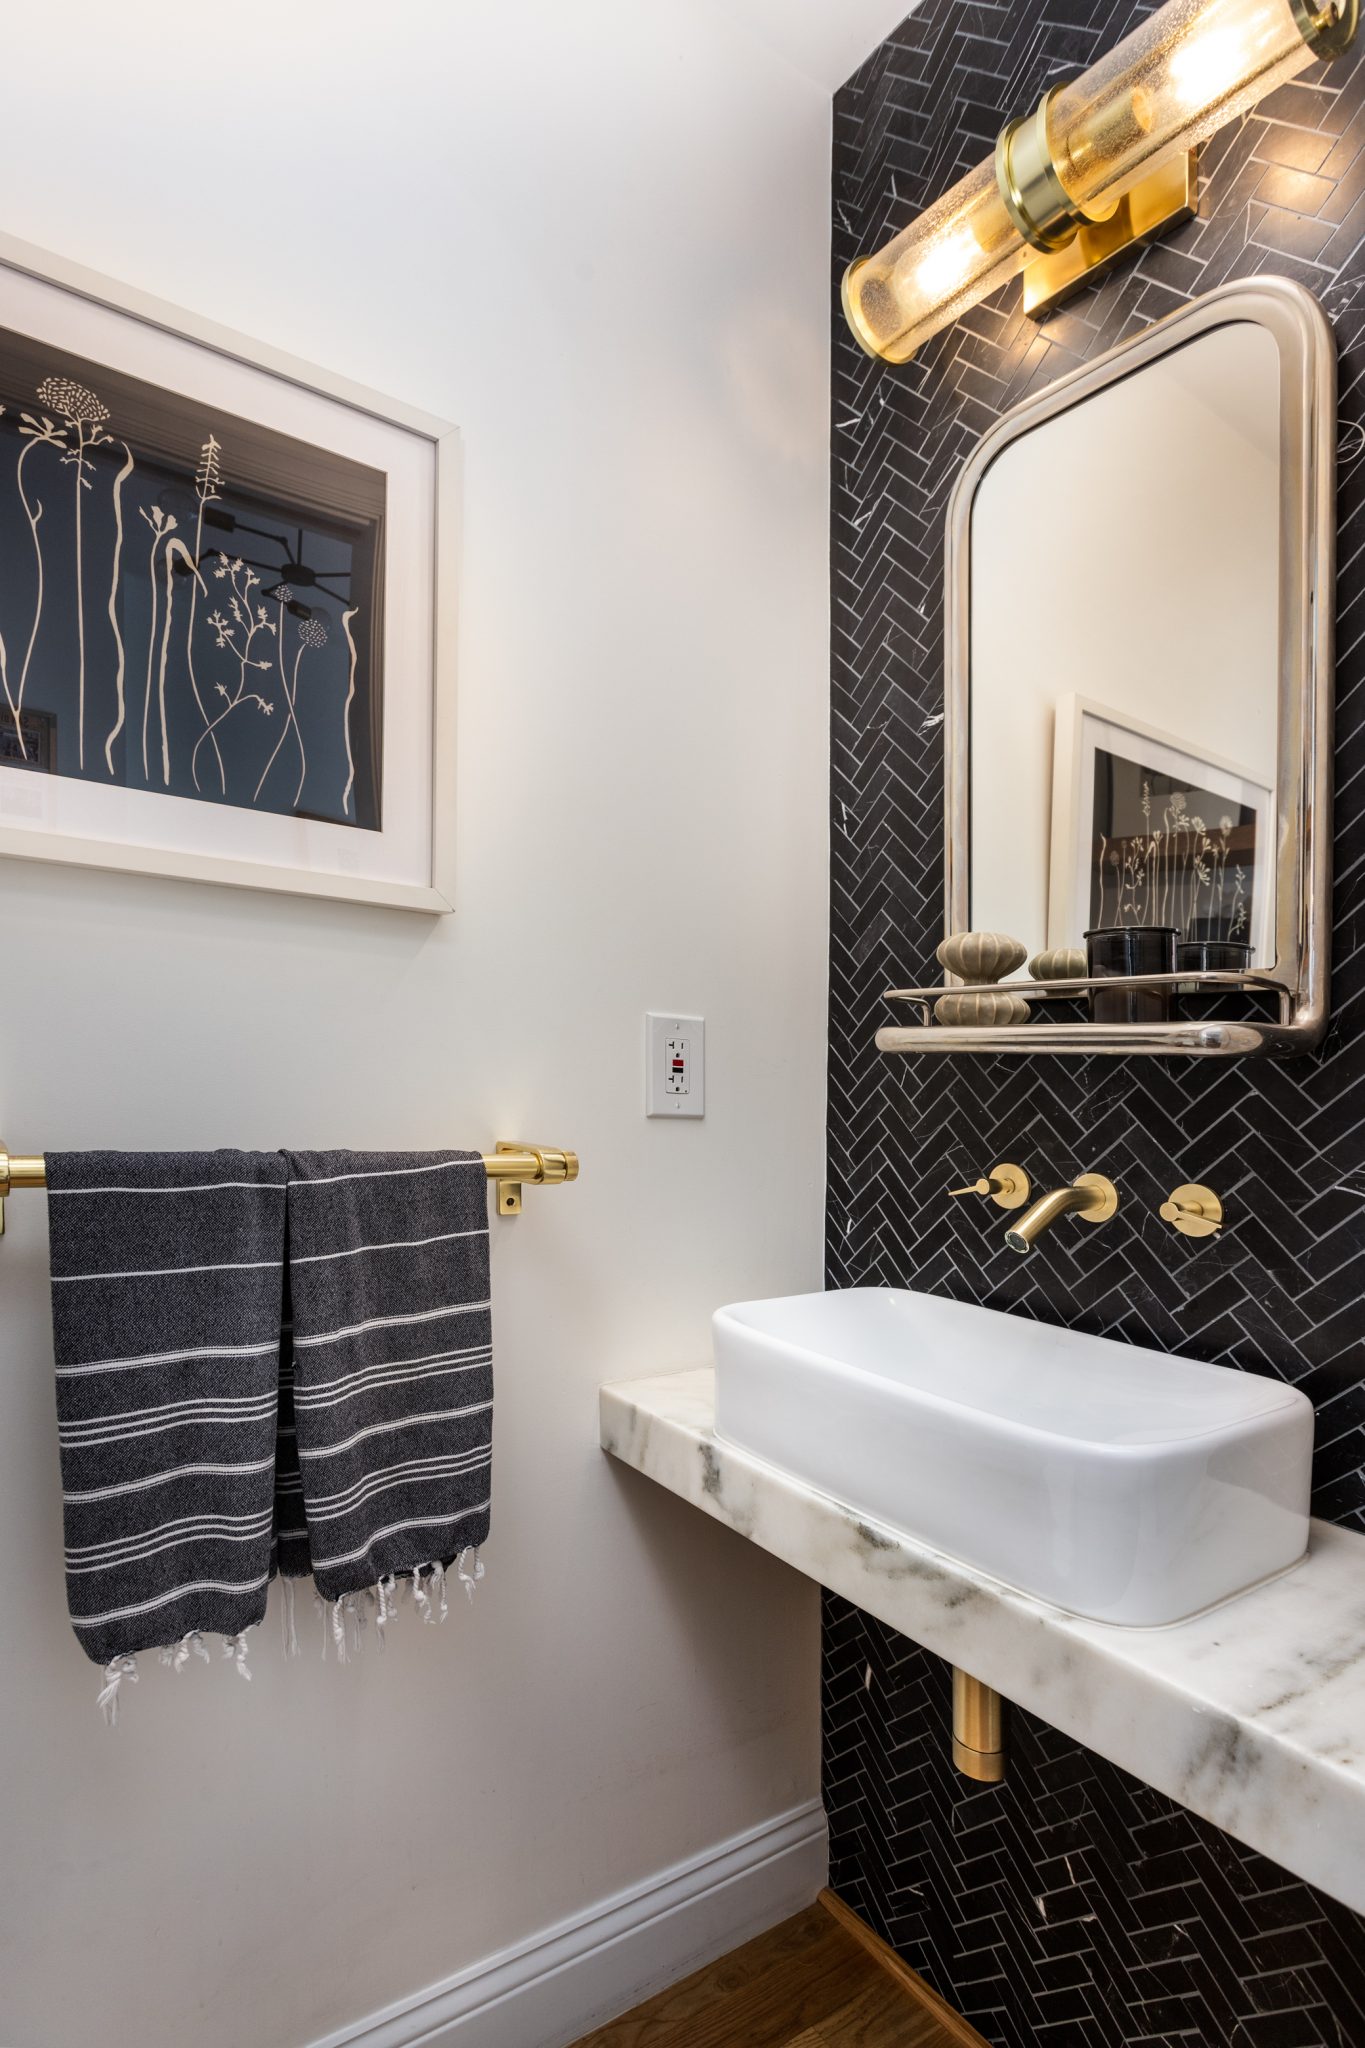 When Do You Know It’s Time for a Bathroom Remodel